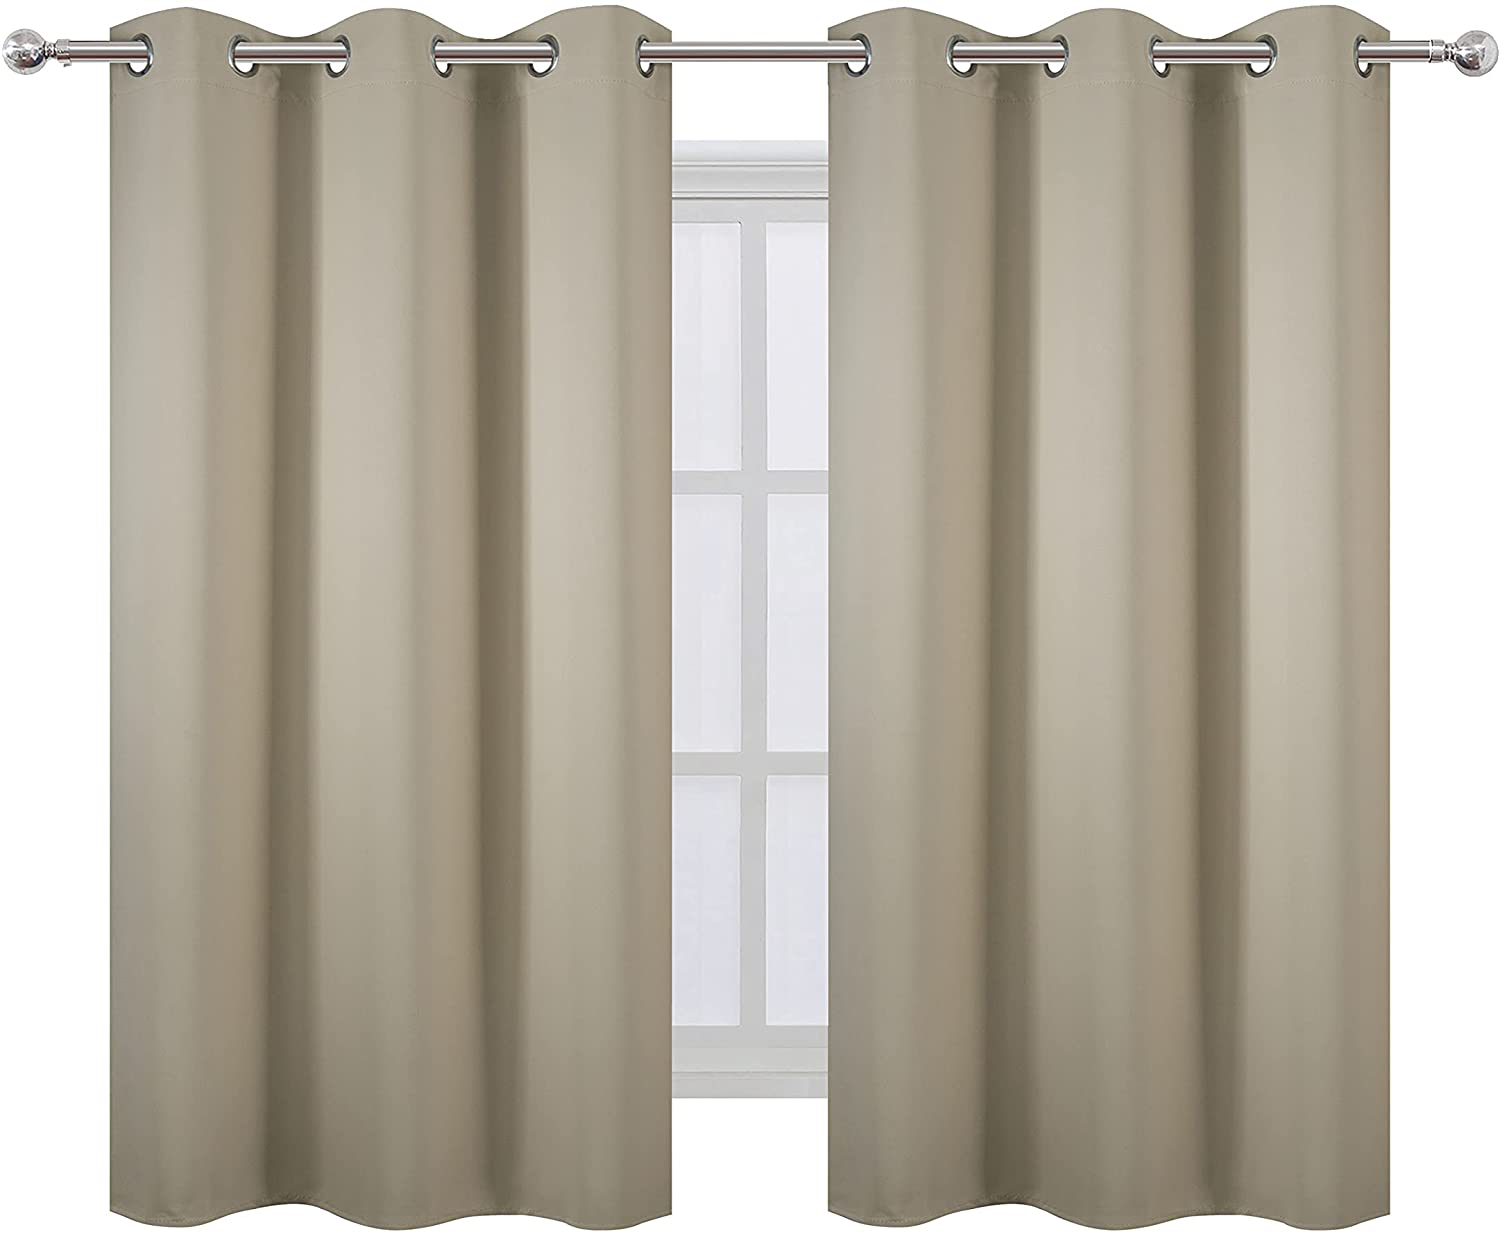 LEMOMO Cappuccino Blackout Curtains 52 x 63 Inch Length/Set of 2 Curtain Panels/Thermal Insulated Room Darkening Blackout Curtains for Bedroom